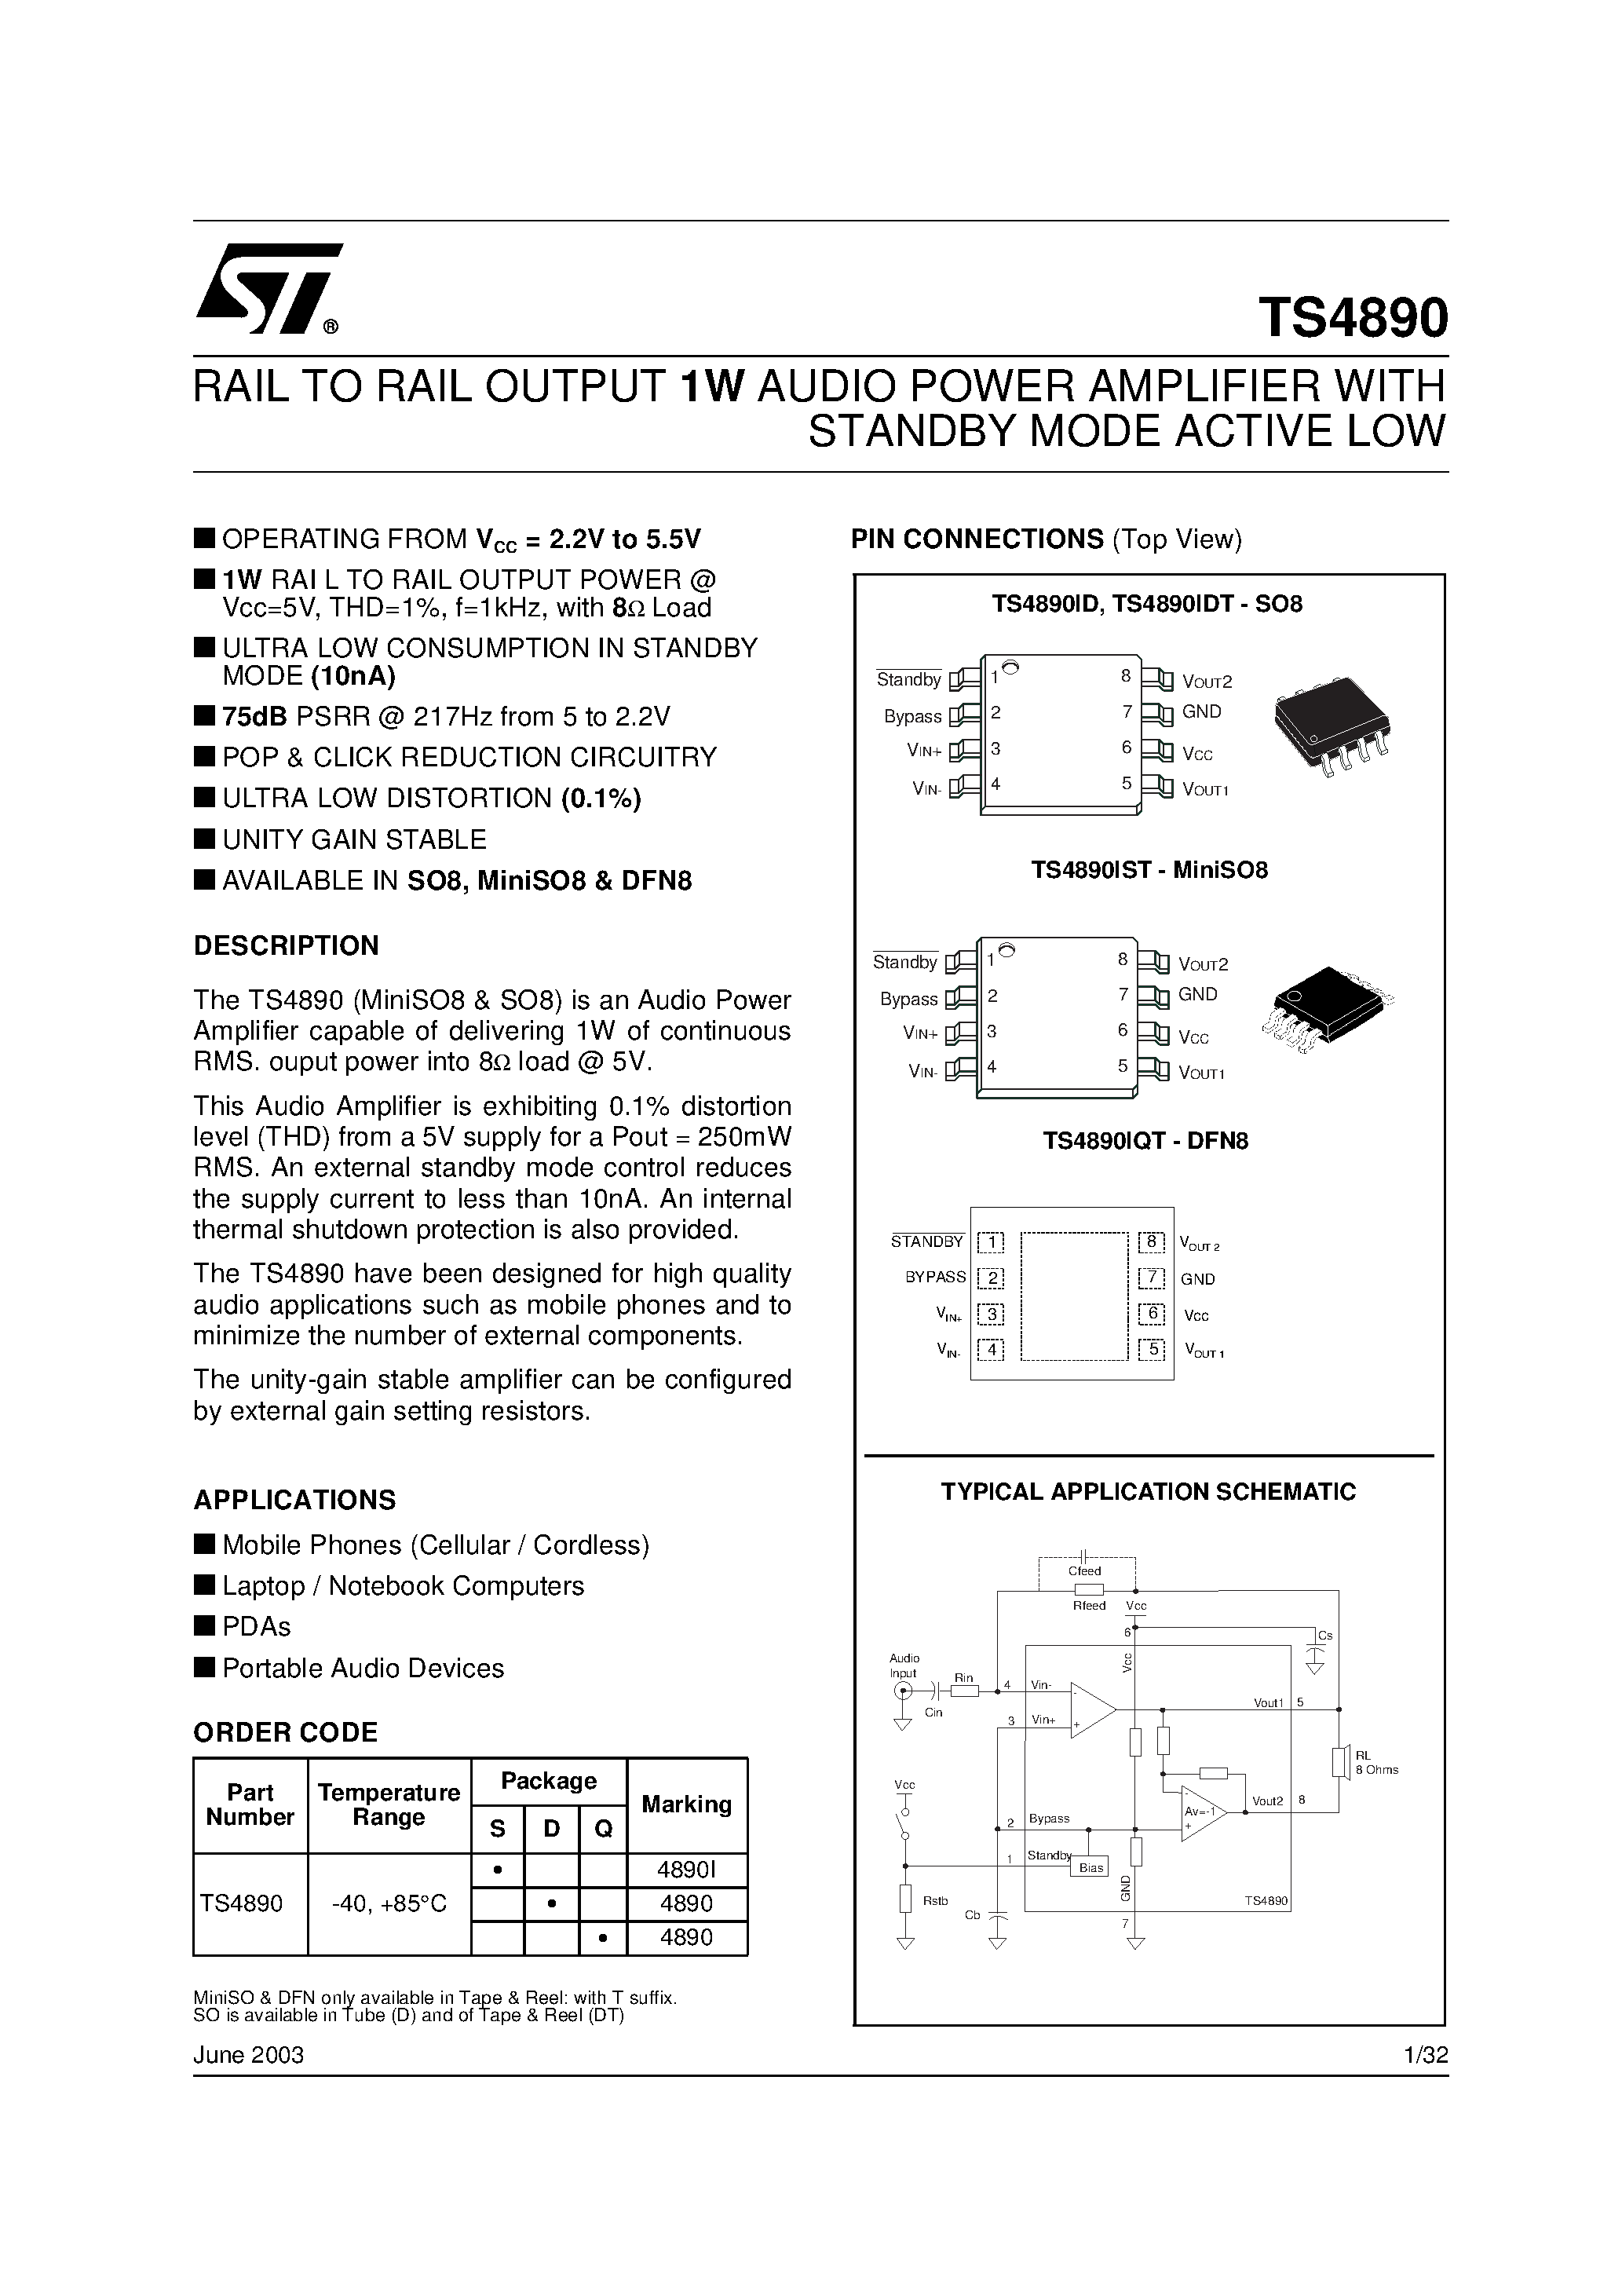 Datasheet TS4890 - RAIL TO RAIL OUTPUT 1W AUDIO POWER AMPLIFIER WITH STANDBY MODE ACTIVE LOW page 1